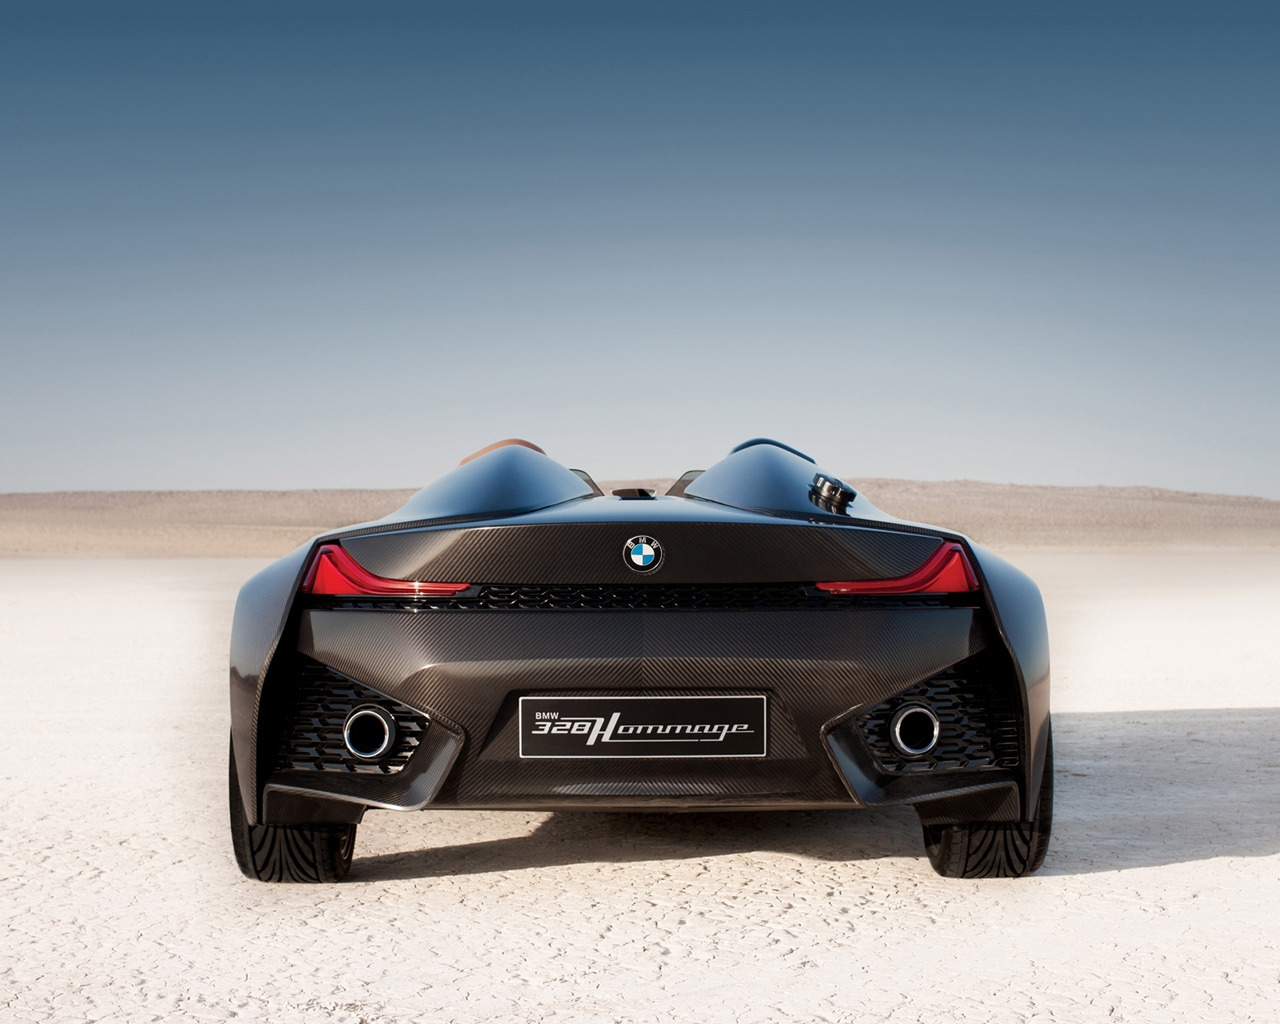 BMW 328 Hommage Rear for 1280 x 1024 resolution